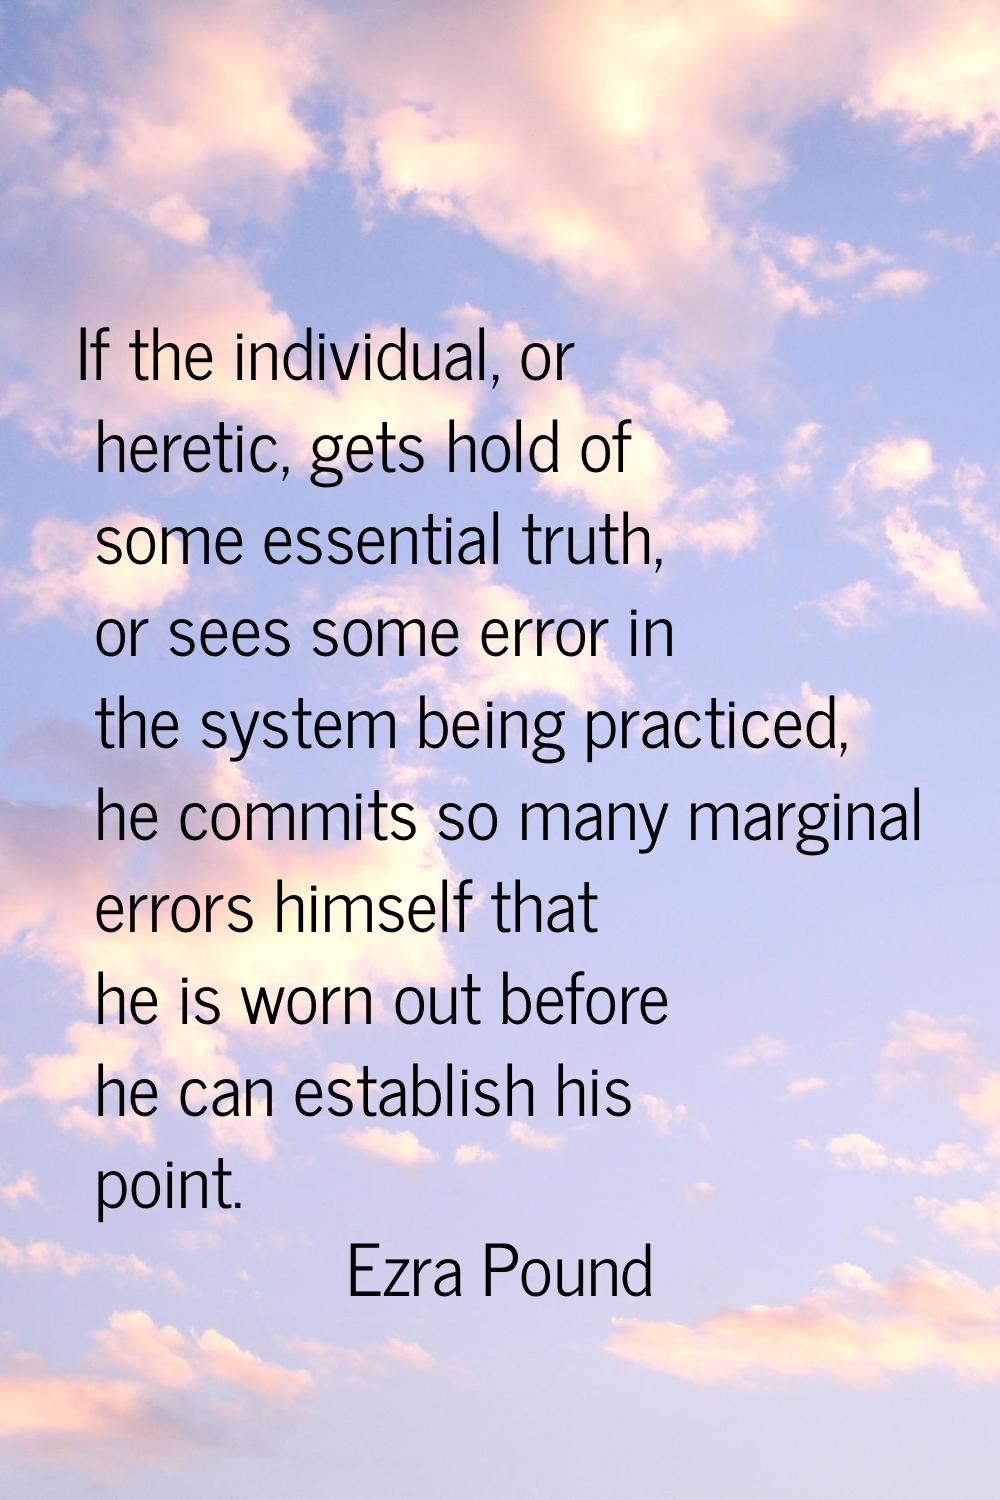 If the individual, or heretic, gets hold of some essential truth, or sees some error in the system 